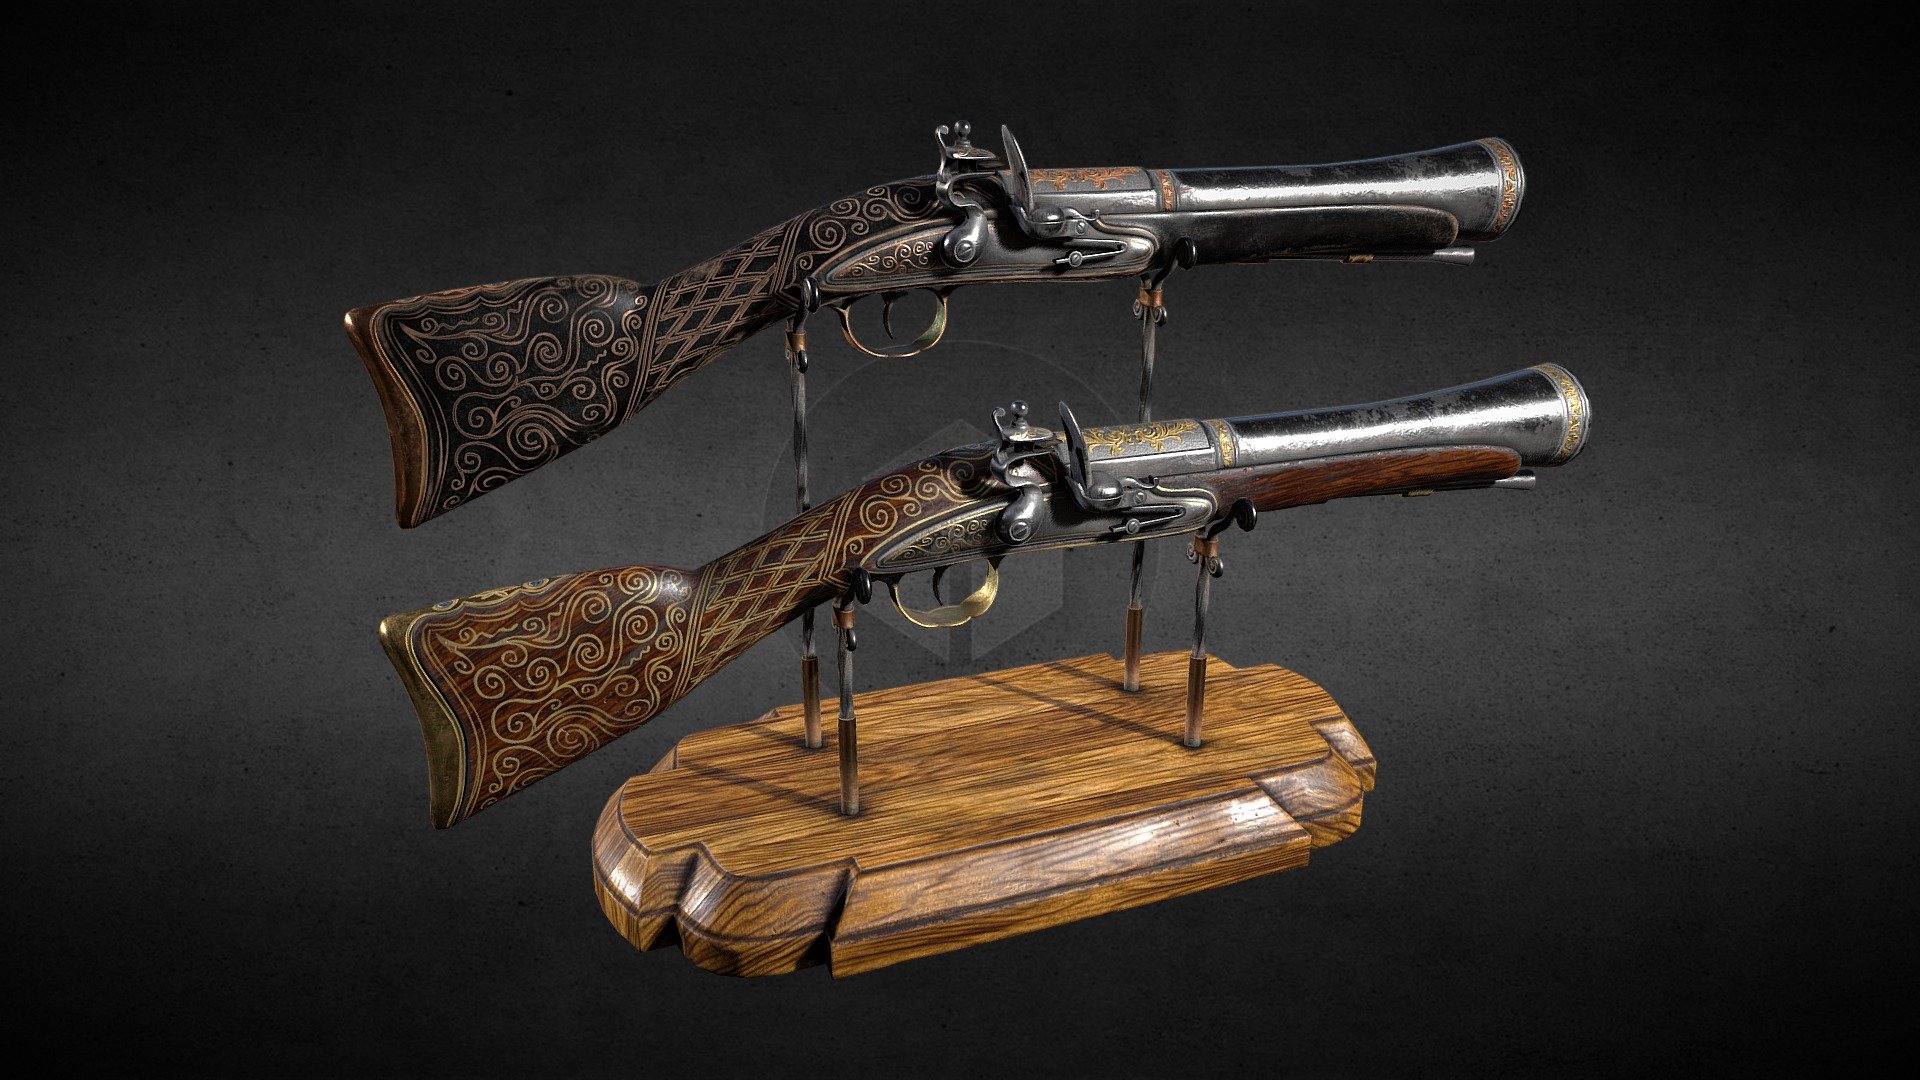 This models is designed for use in any engine supporting PBR rendering, such as Unity, UnrealEngine, CryEngine and others.


Technical Details:

-2 skins - classic and black painted
-Texture Size: 

Rifle - 4096x4096  

Stand - 2048x2048 

-Textures: 

BaseColor 

Roughness 

Metallic 

Normal 

AmbientOcclusion
-Polycount:  

Rifle - 3813tr.

Stand - 3368tr.


-Each moving part has its pivot point.

-DemoStand included in package  


ATTENTION: Due to the site’s limit on file size, I downloaded only textures for the MetalRogh shader. If you need other textures, for example for Unity, or UnrealEngine - just write to me 3d model